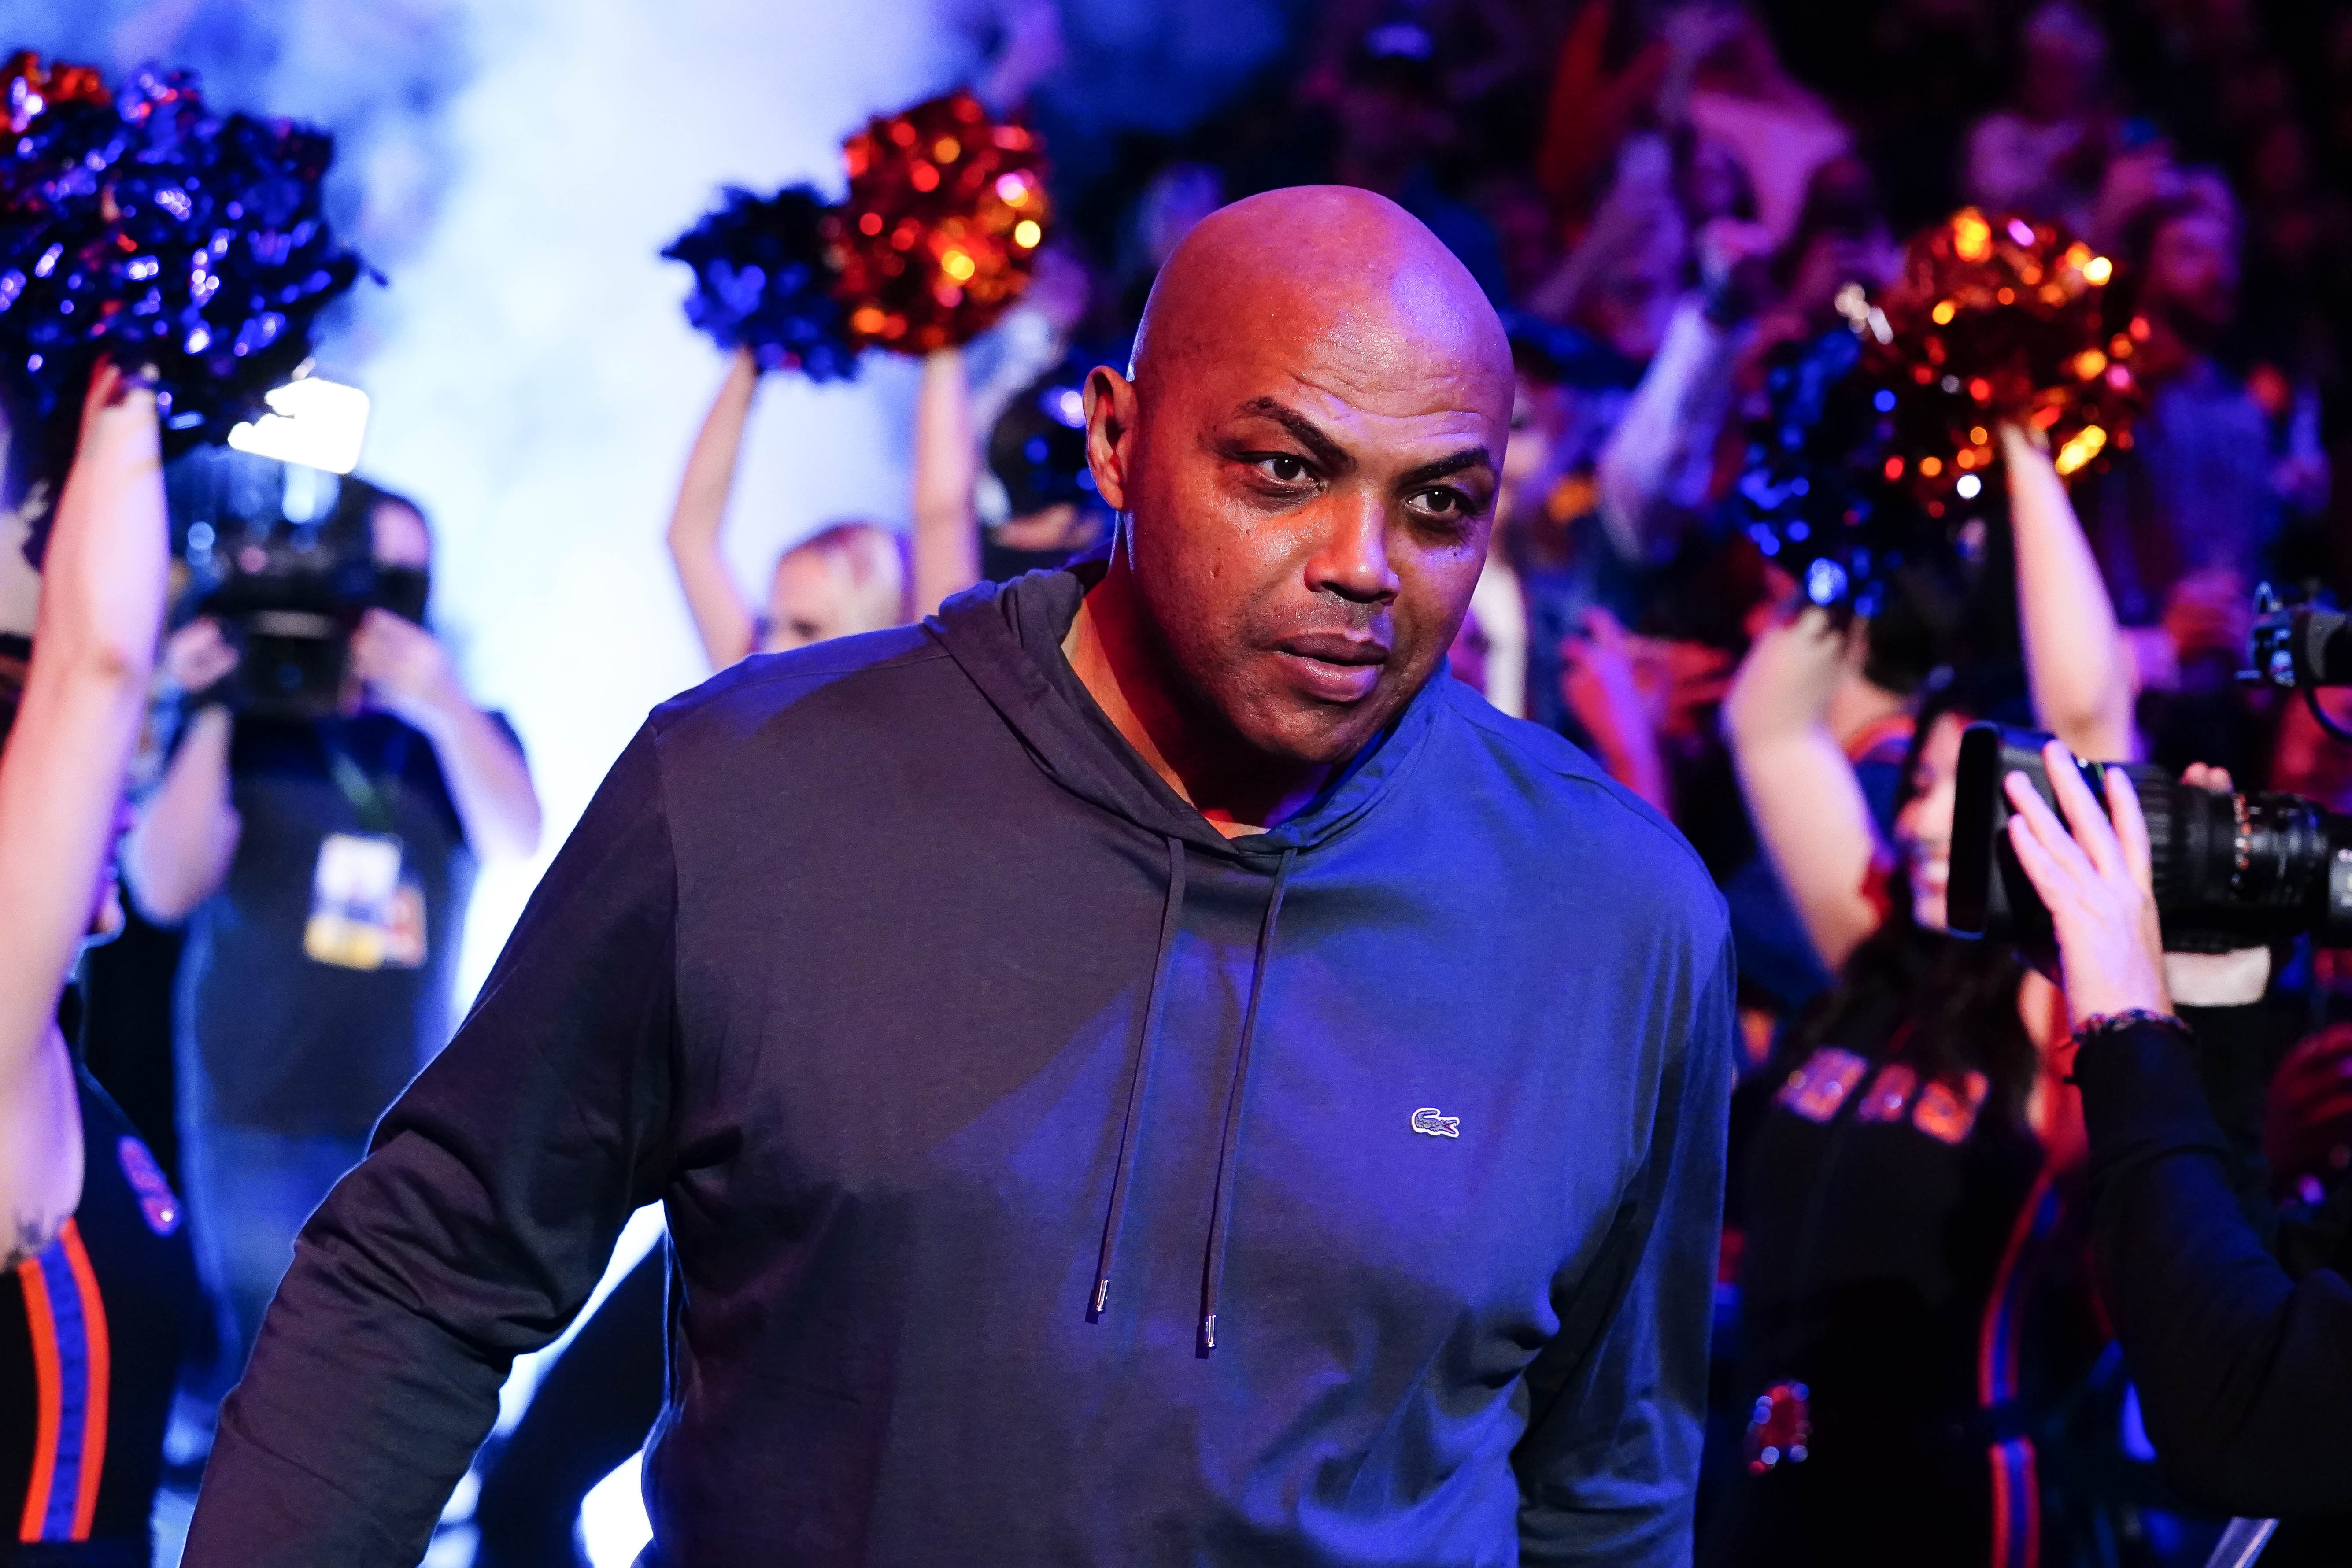 Charles Barkley isn't retiring or joining another network. TNT 'is the only place' for him